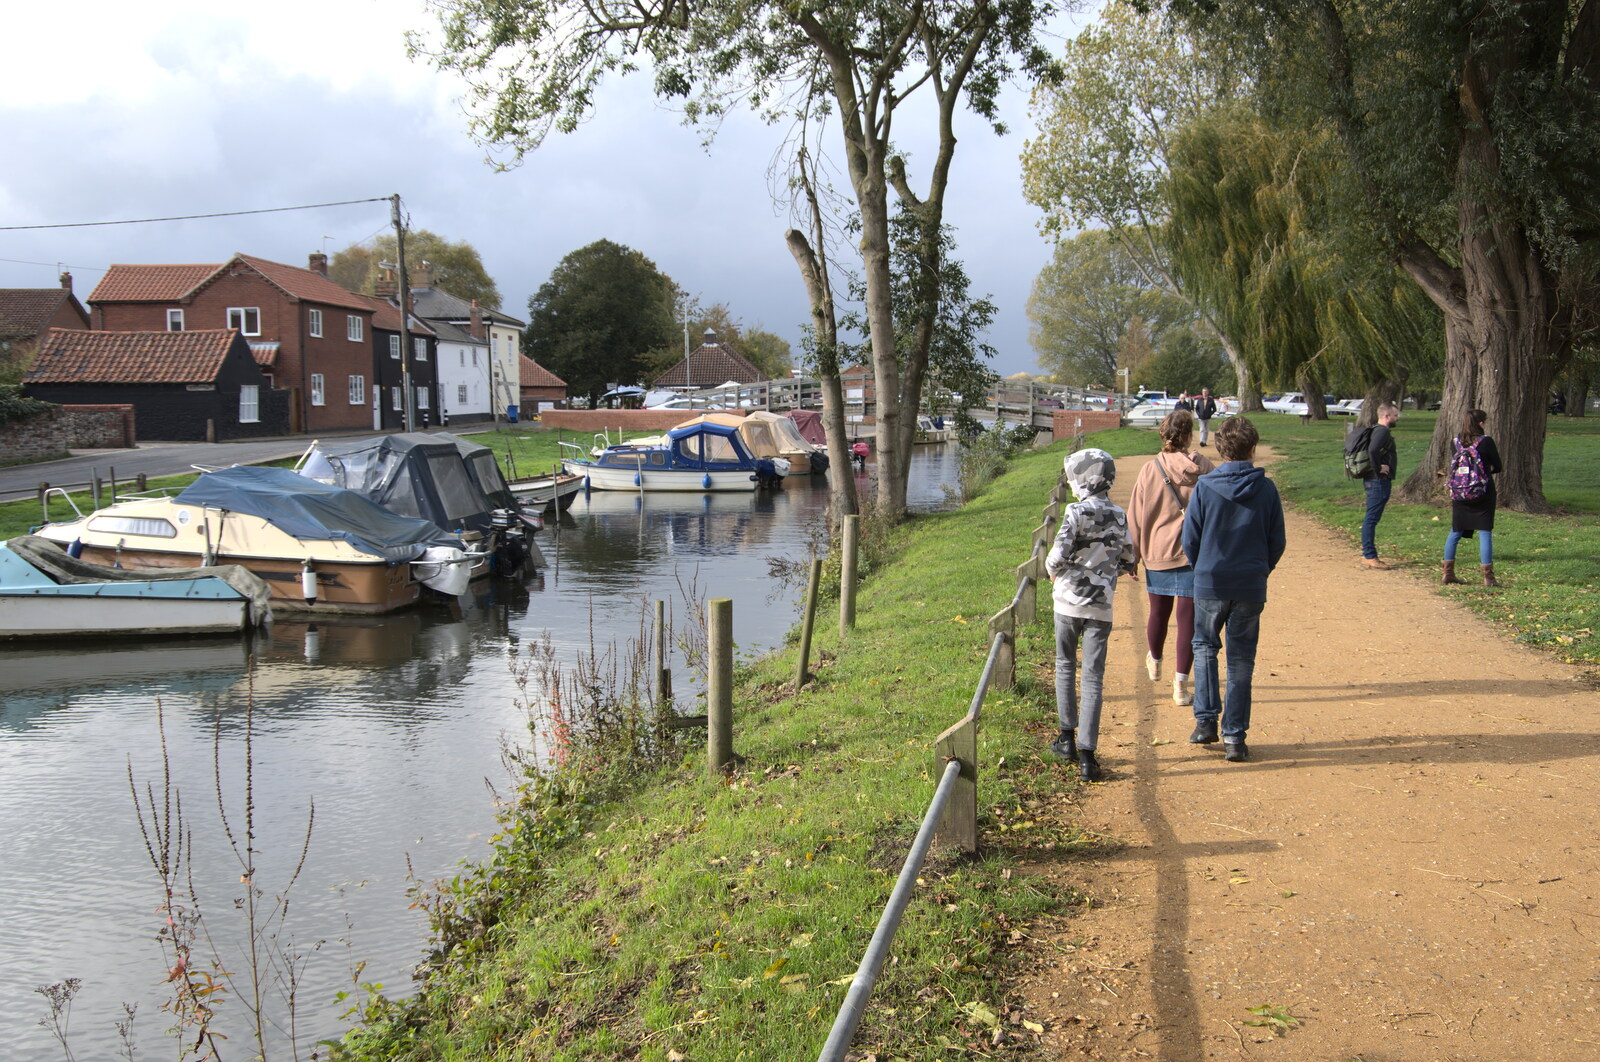 An Afternoon in Beccles, Suffolk - 26th October 2022: We walk past the river in Beccles